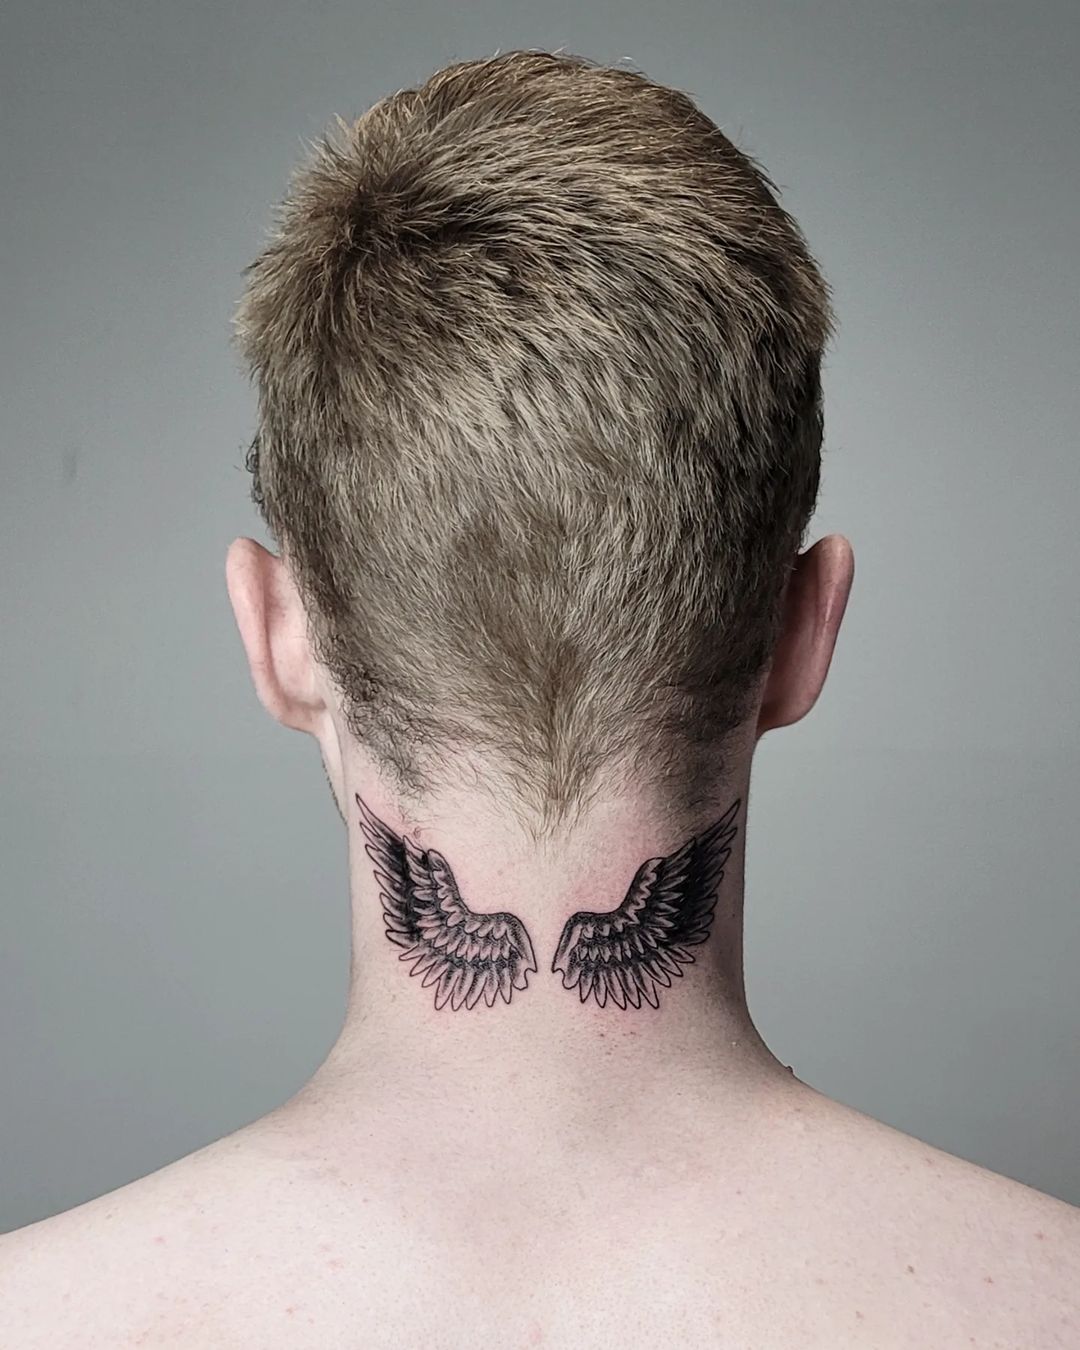 44 Creative Neck Tattoo Ideas for Men and Women You Must See - Hairstyle